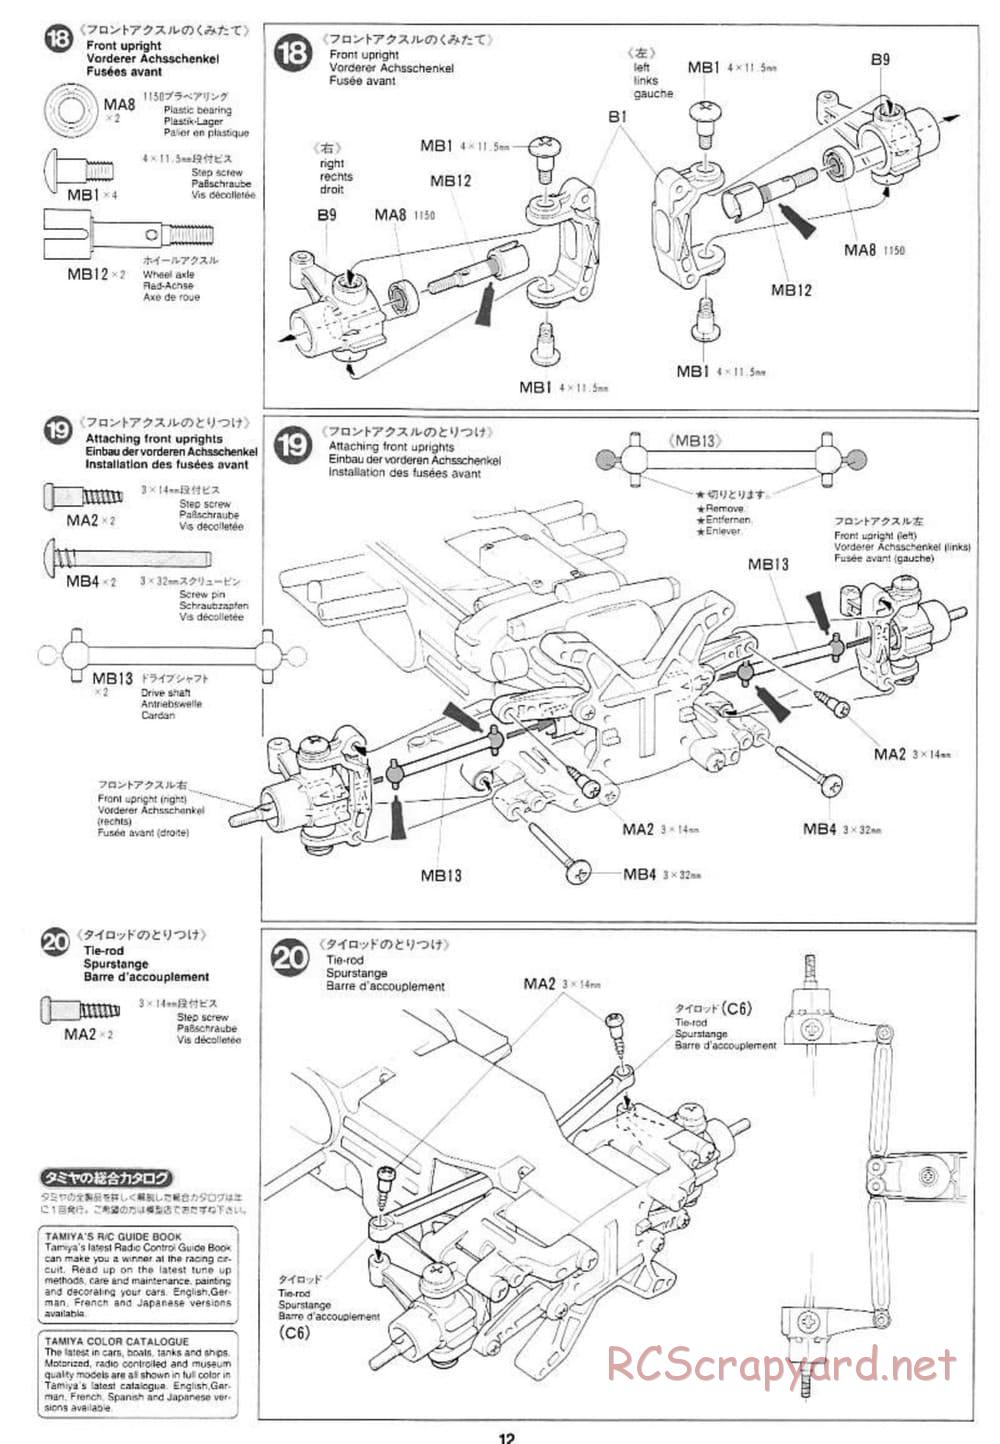 Tamiya - Pennzoil Nismo GT-R - TL-01 Chassis - Manual - Page 12